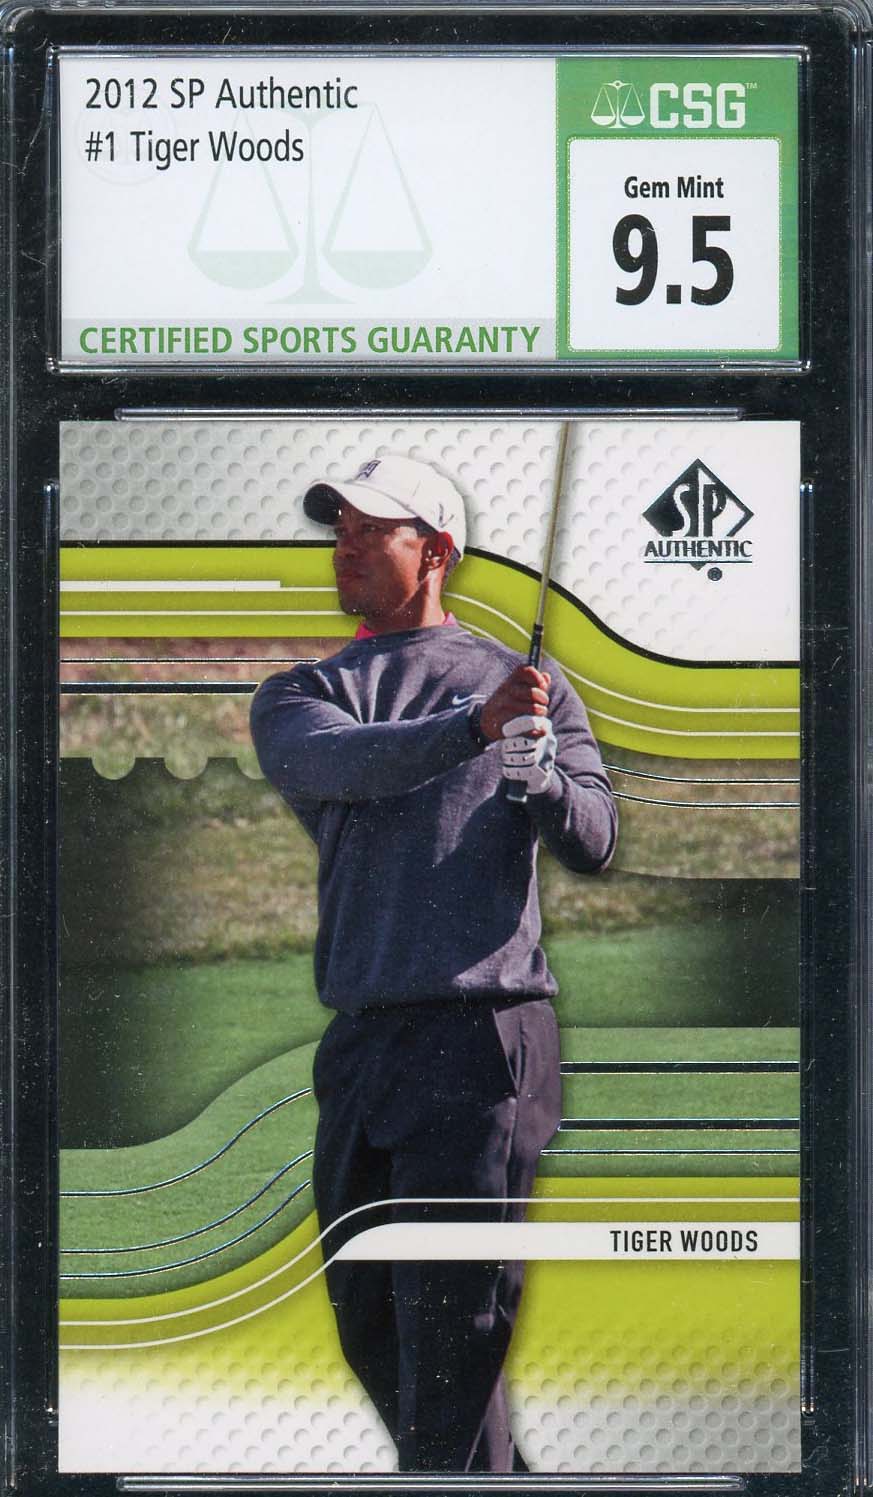 Tiger Woods 2012 SP Authentic Golf Card #1 Graded CSG 9.5-Powers Sports Memorabilia